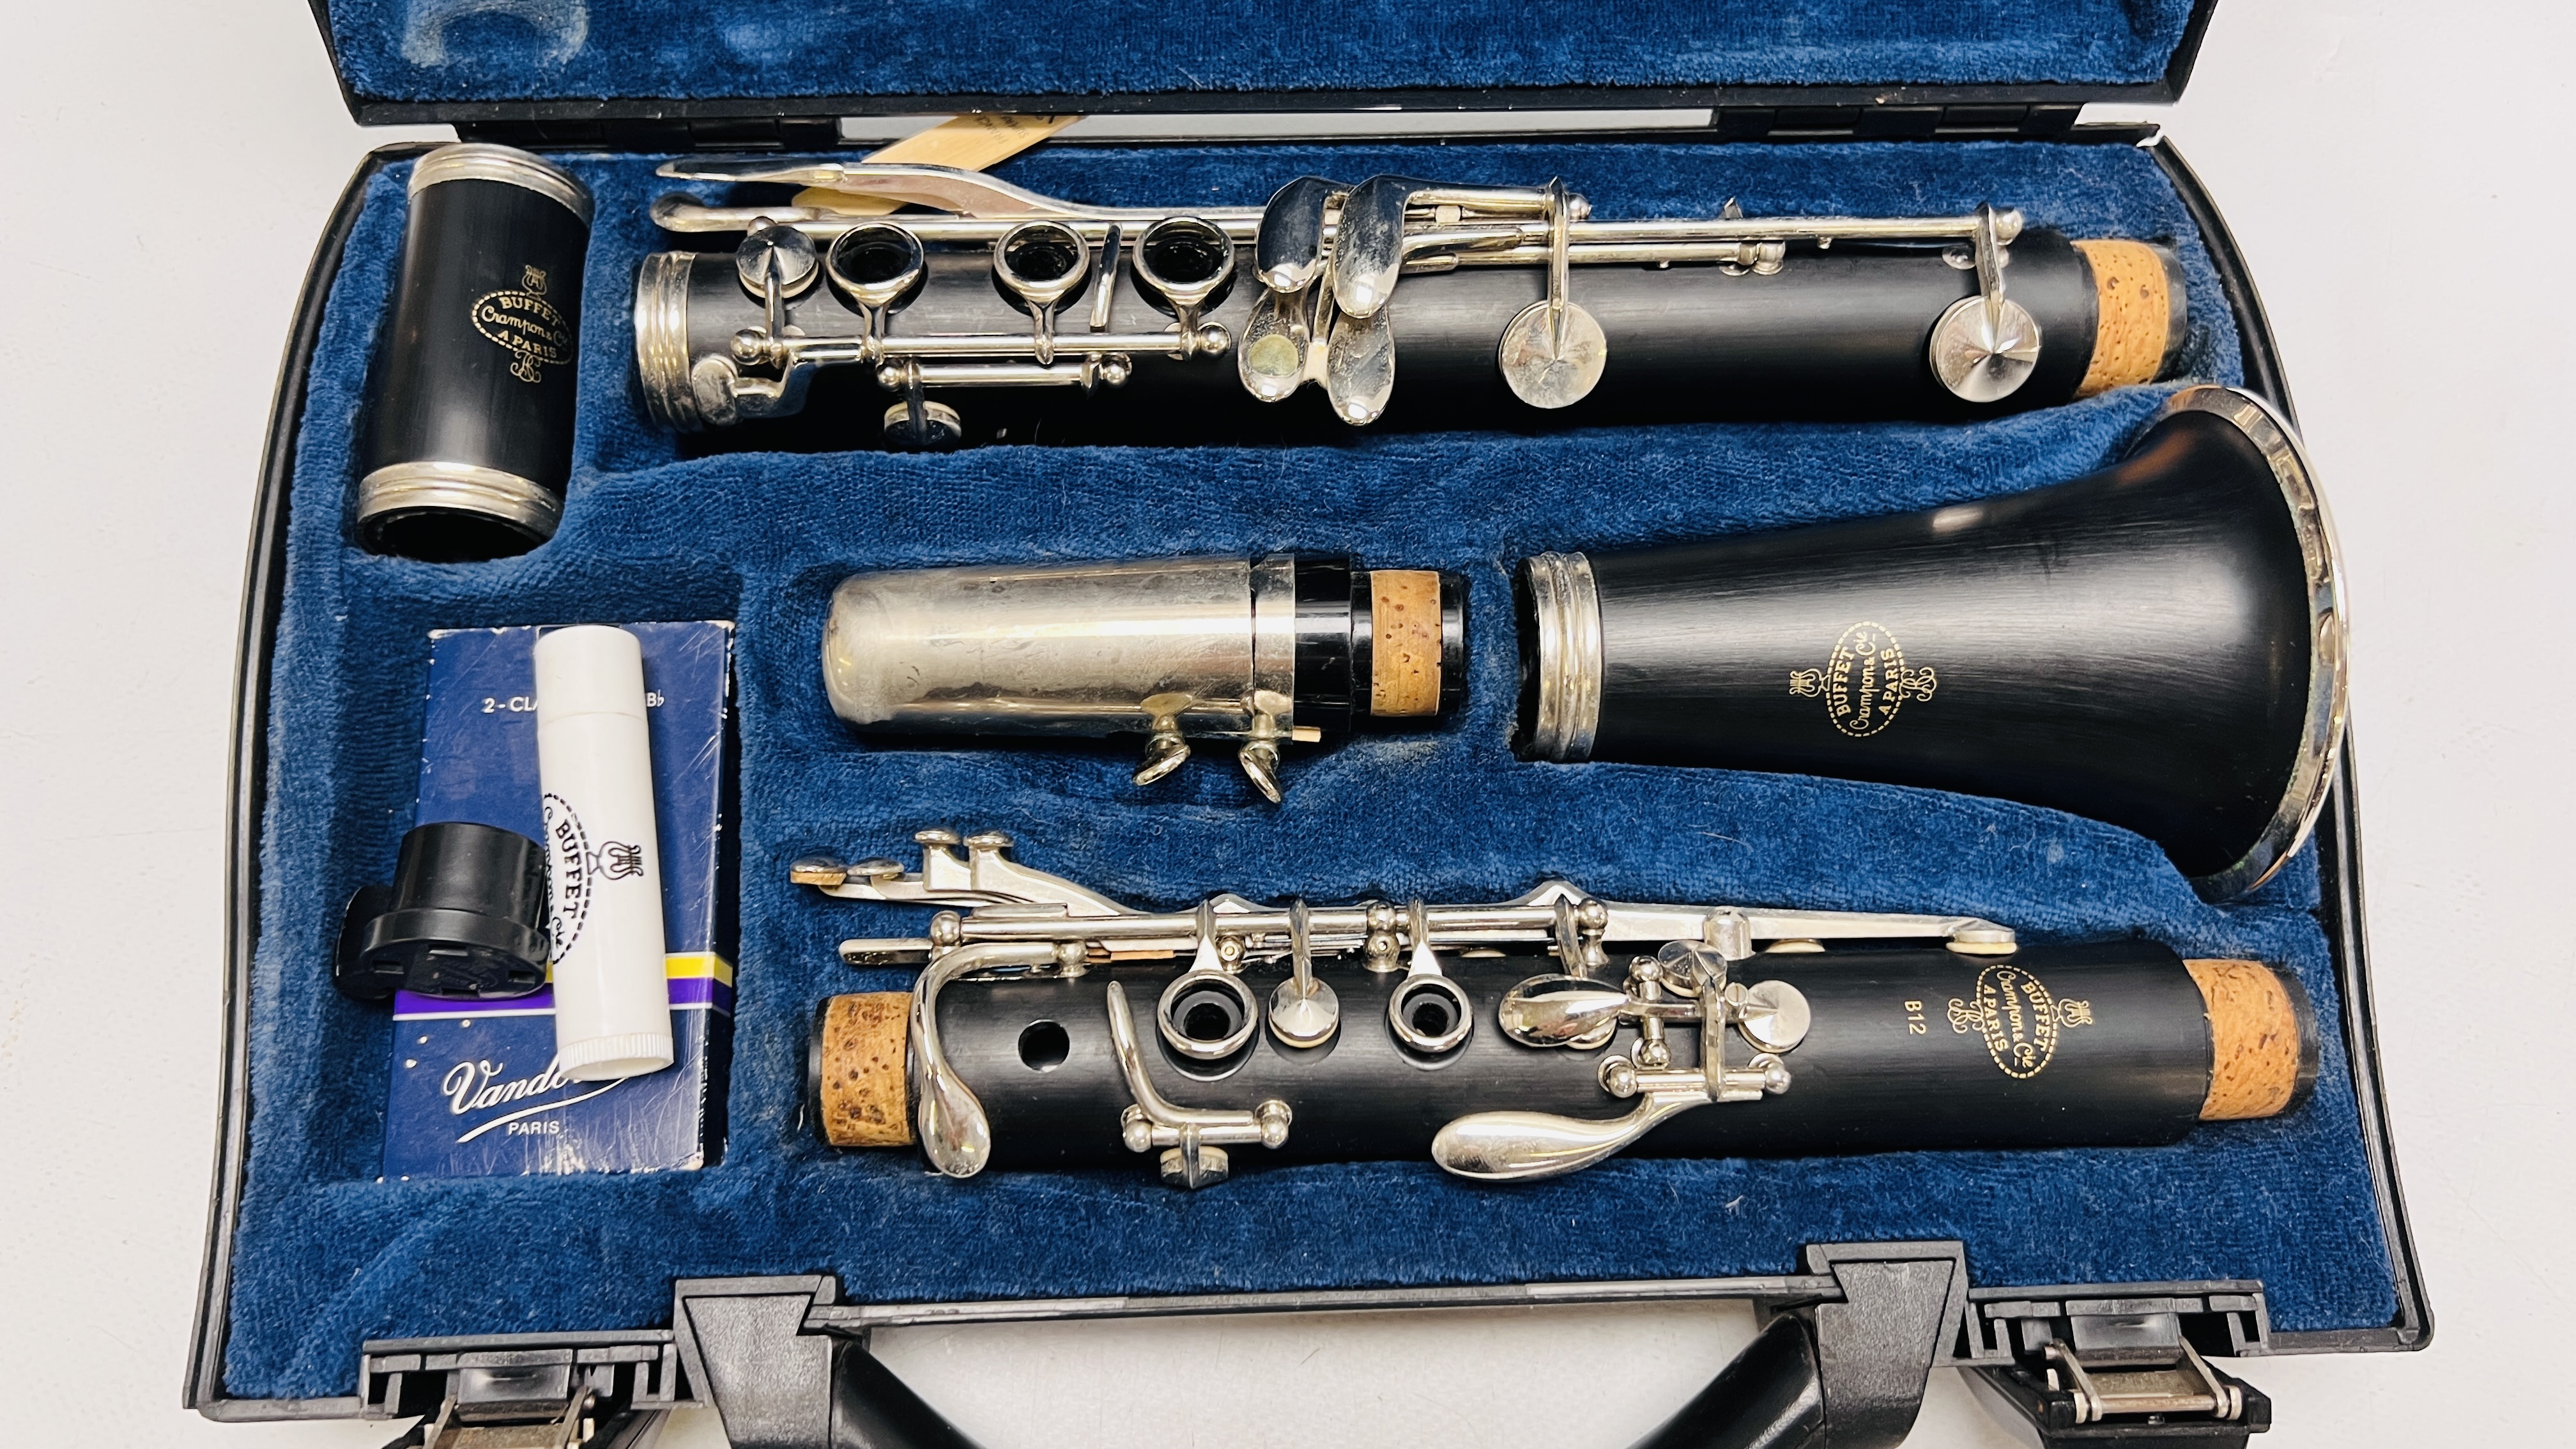 A BUFFET CRAMPON AND CIE B12 CLARINET IN FITTED HARDCASE - Image 2 of 6